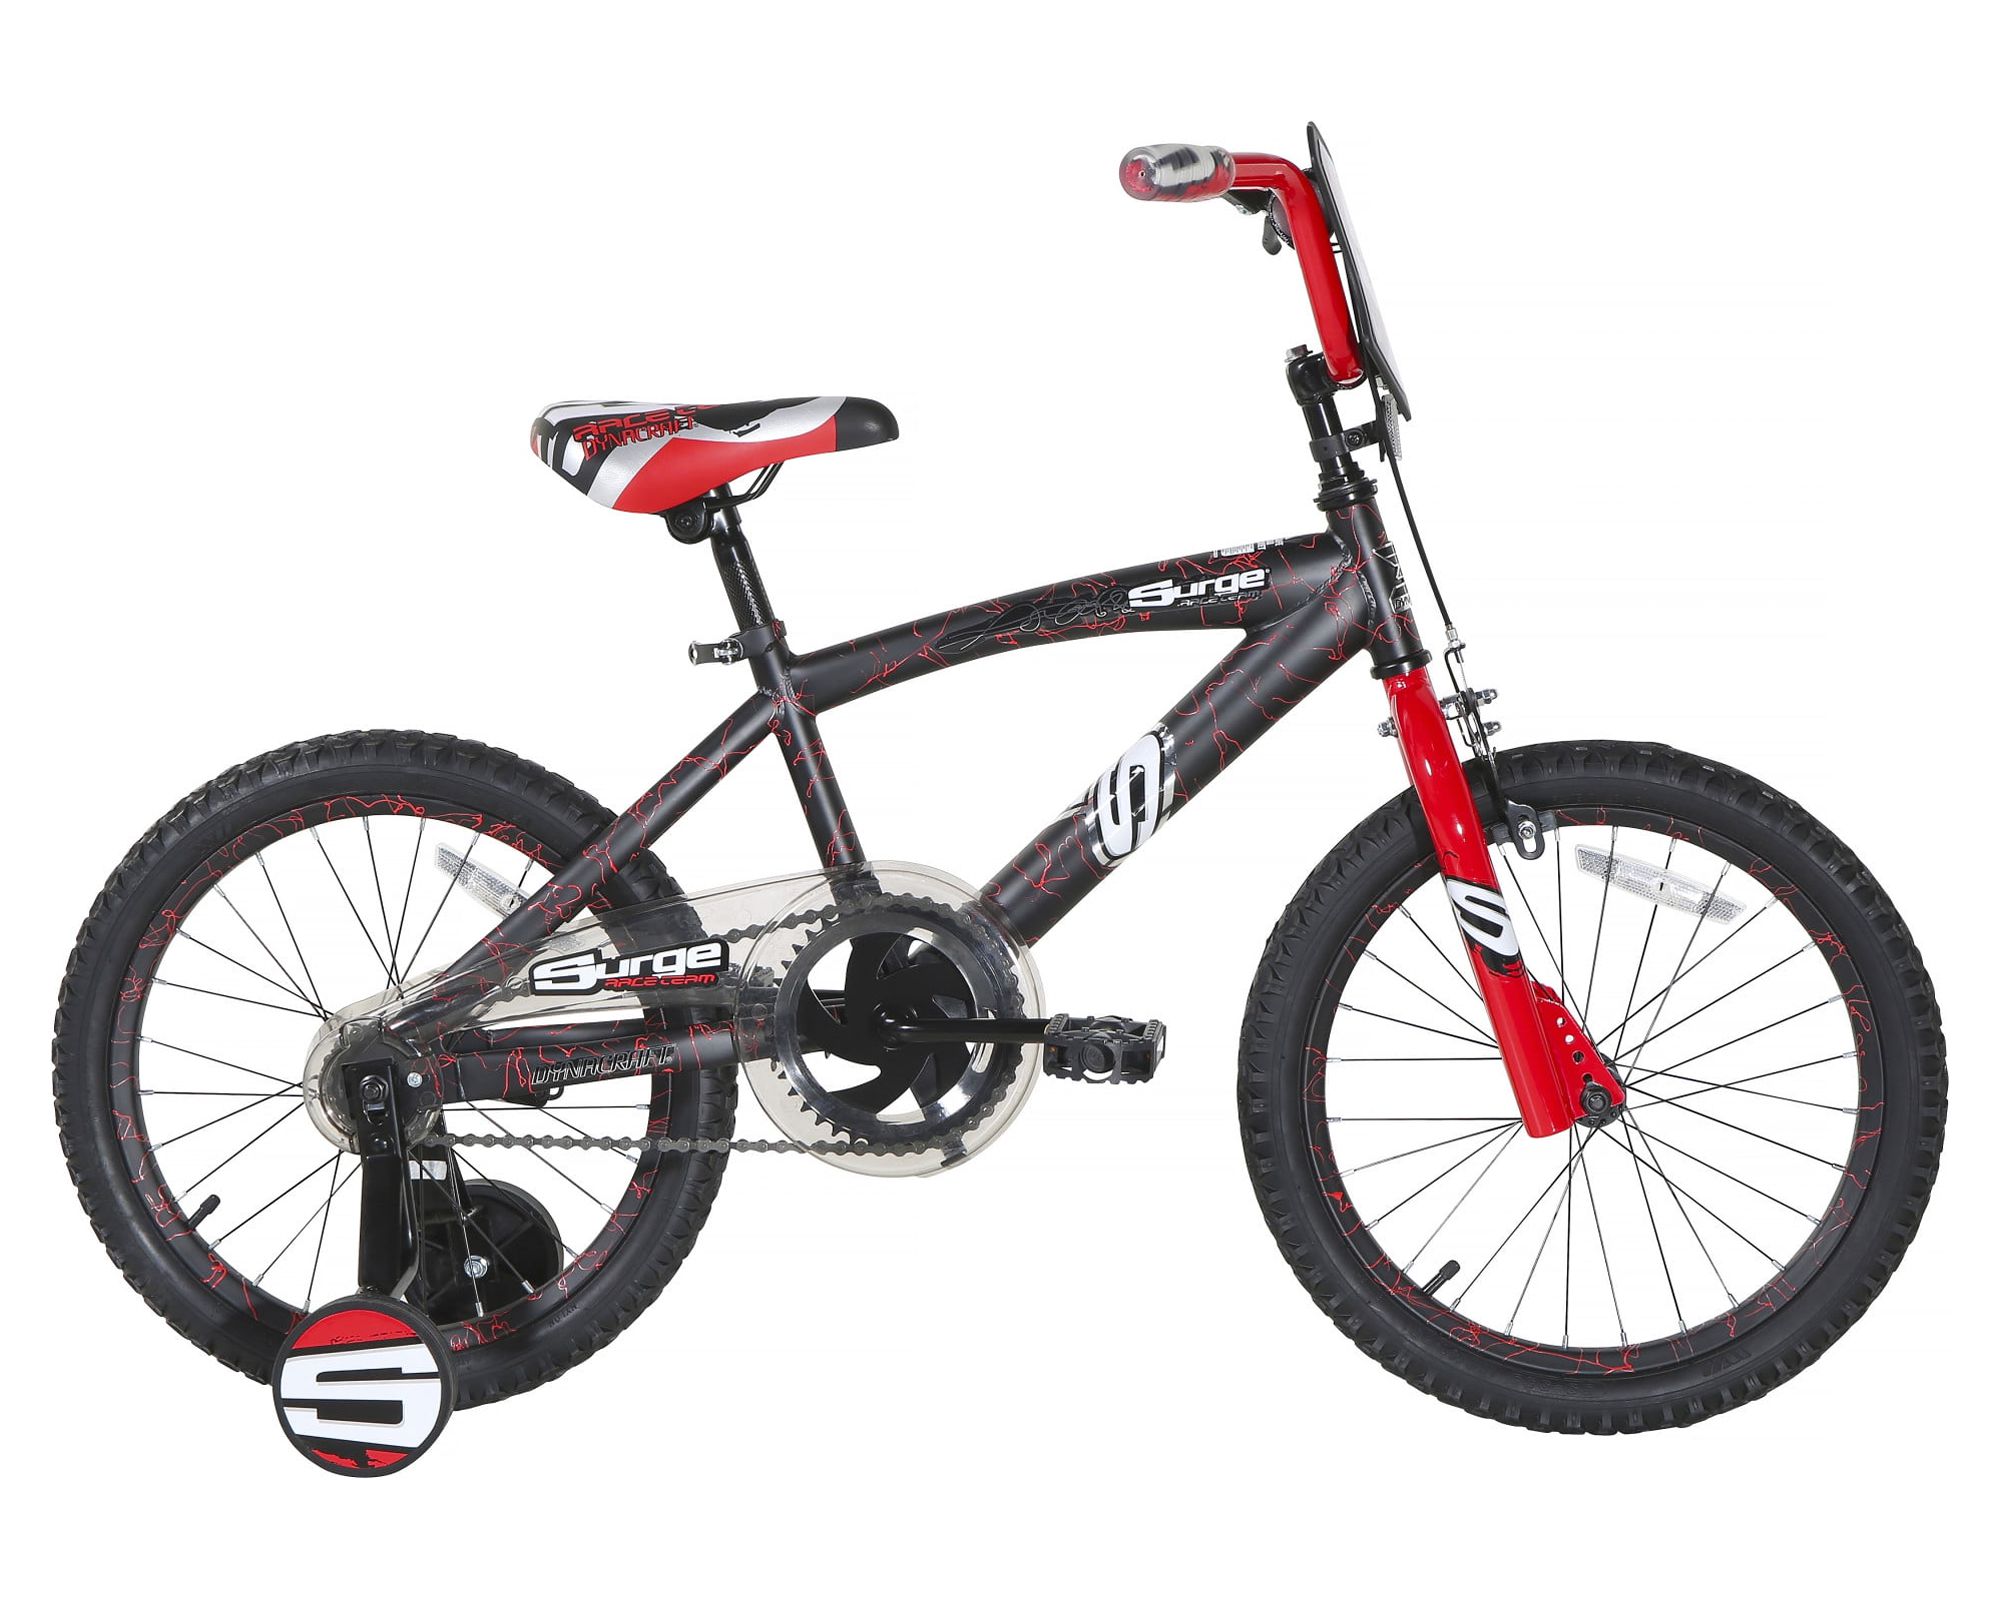 Dynacraft Surge 18-inch Boys BMX Bike for Age 6-9 Years - image 2 of 11